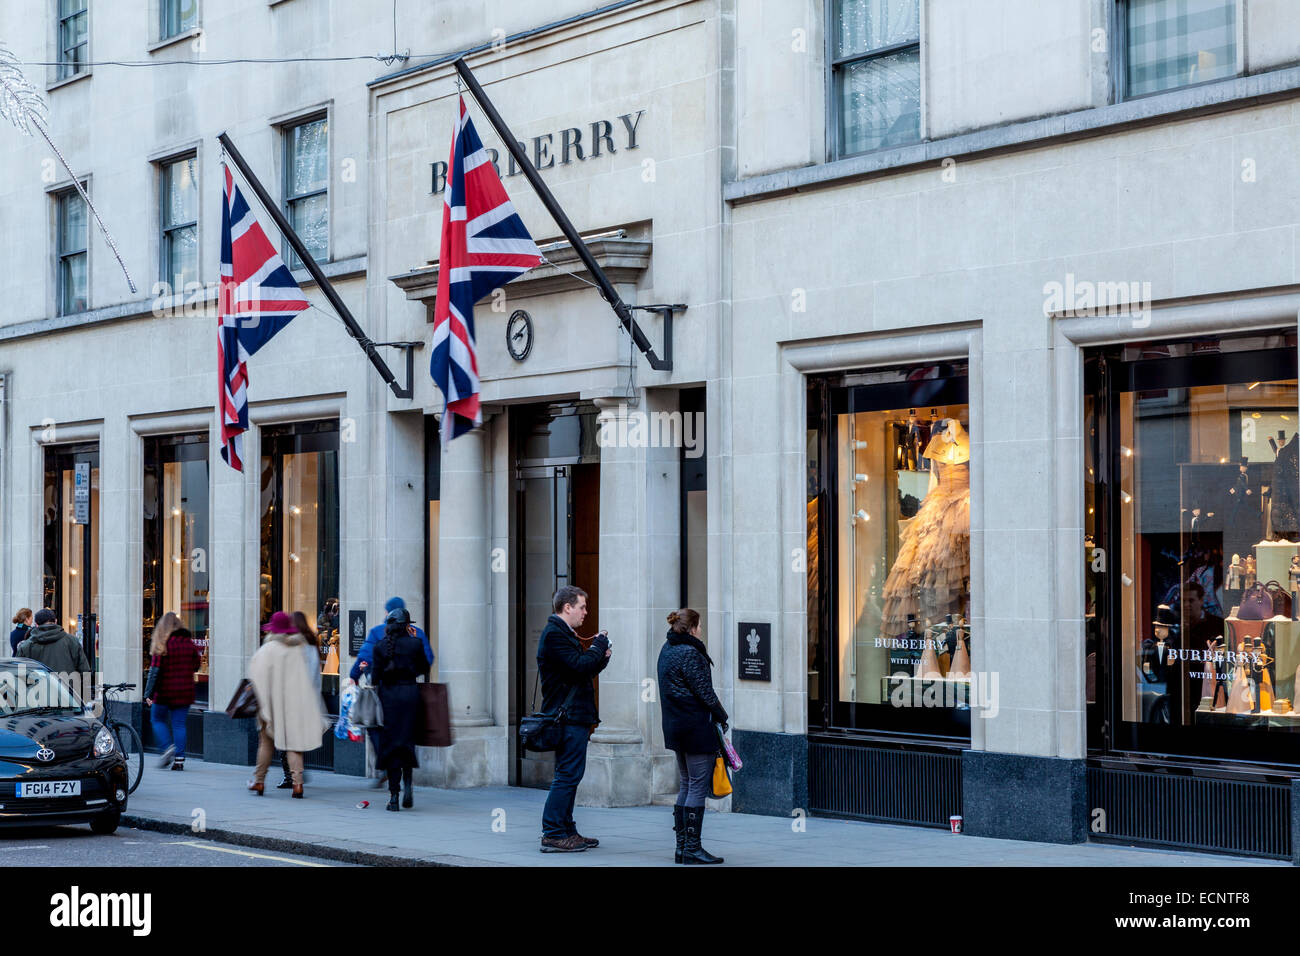 The Burberry Store In New Bond Street 